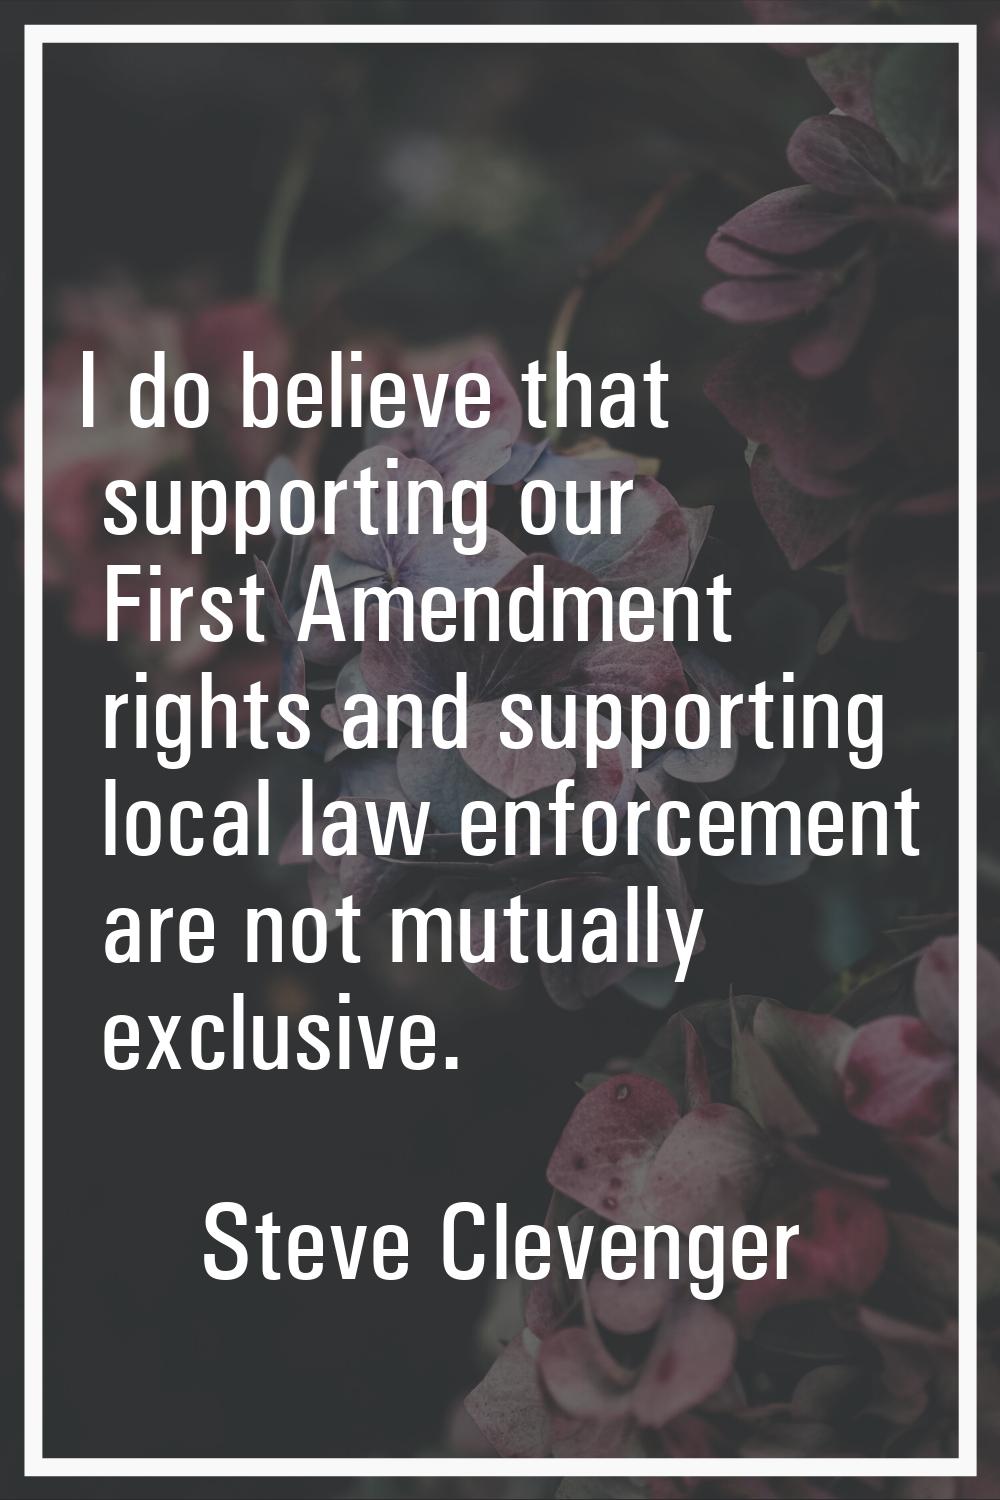 I do believe that supporting our First Amendment rights and supporting local law enforcement are no